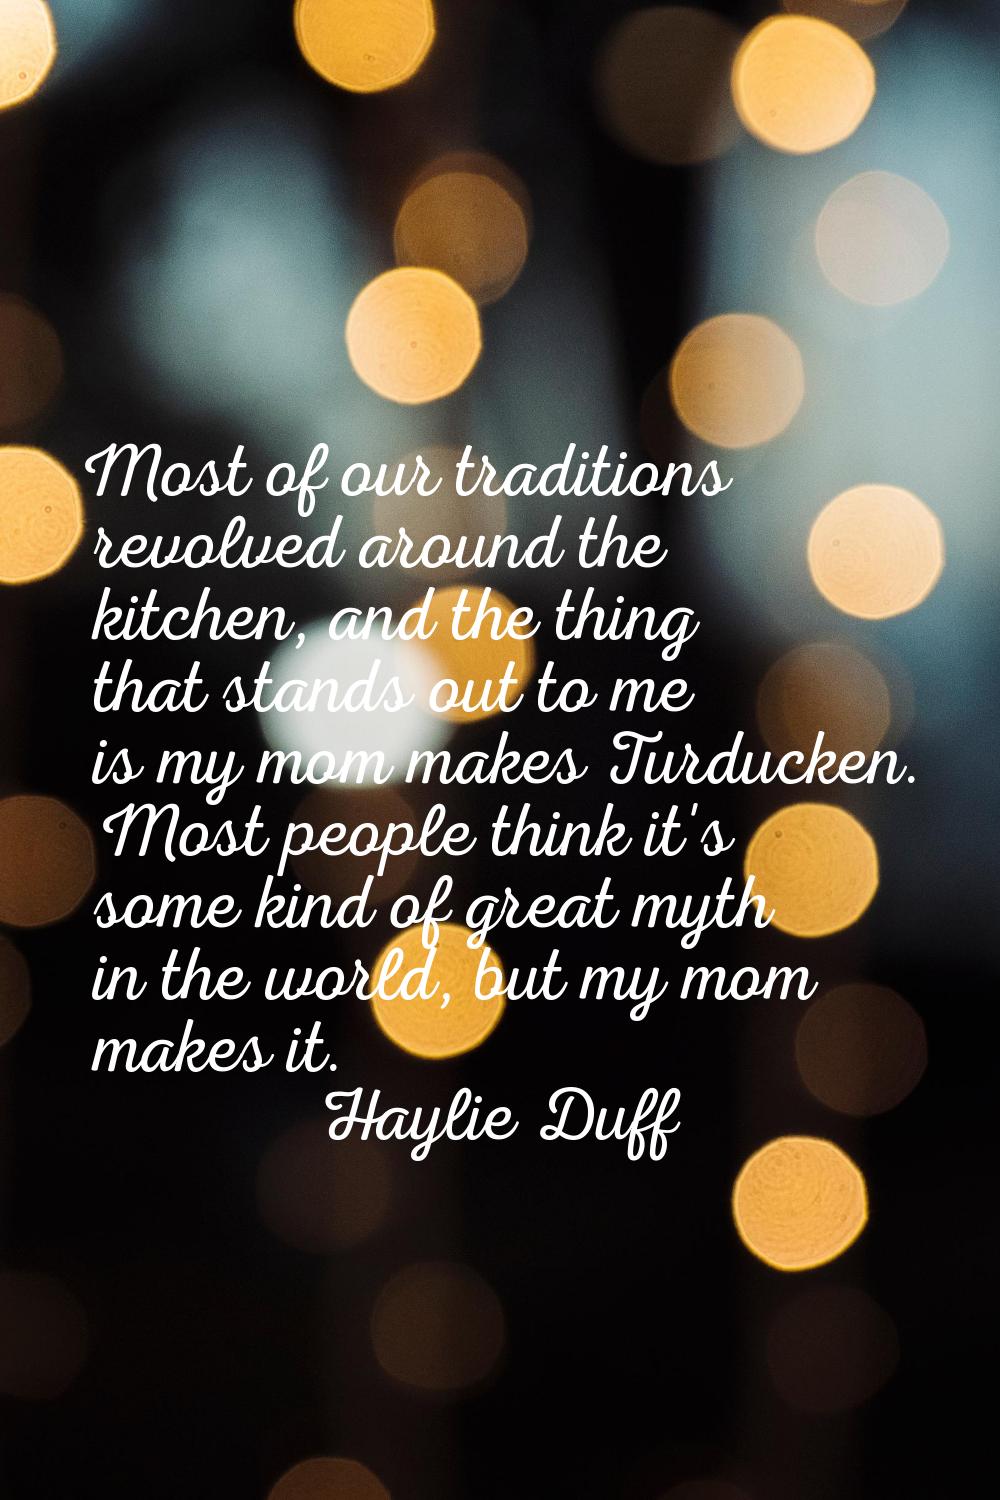 Most of our traditions revolved around the kitchen, and the thing that stands out to me is my mom m